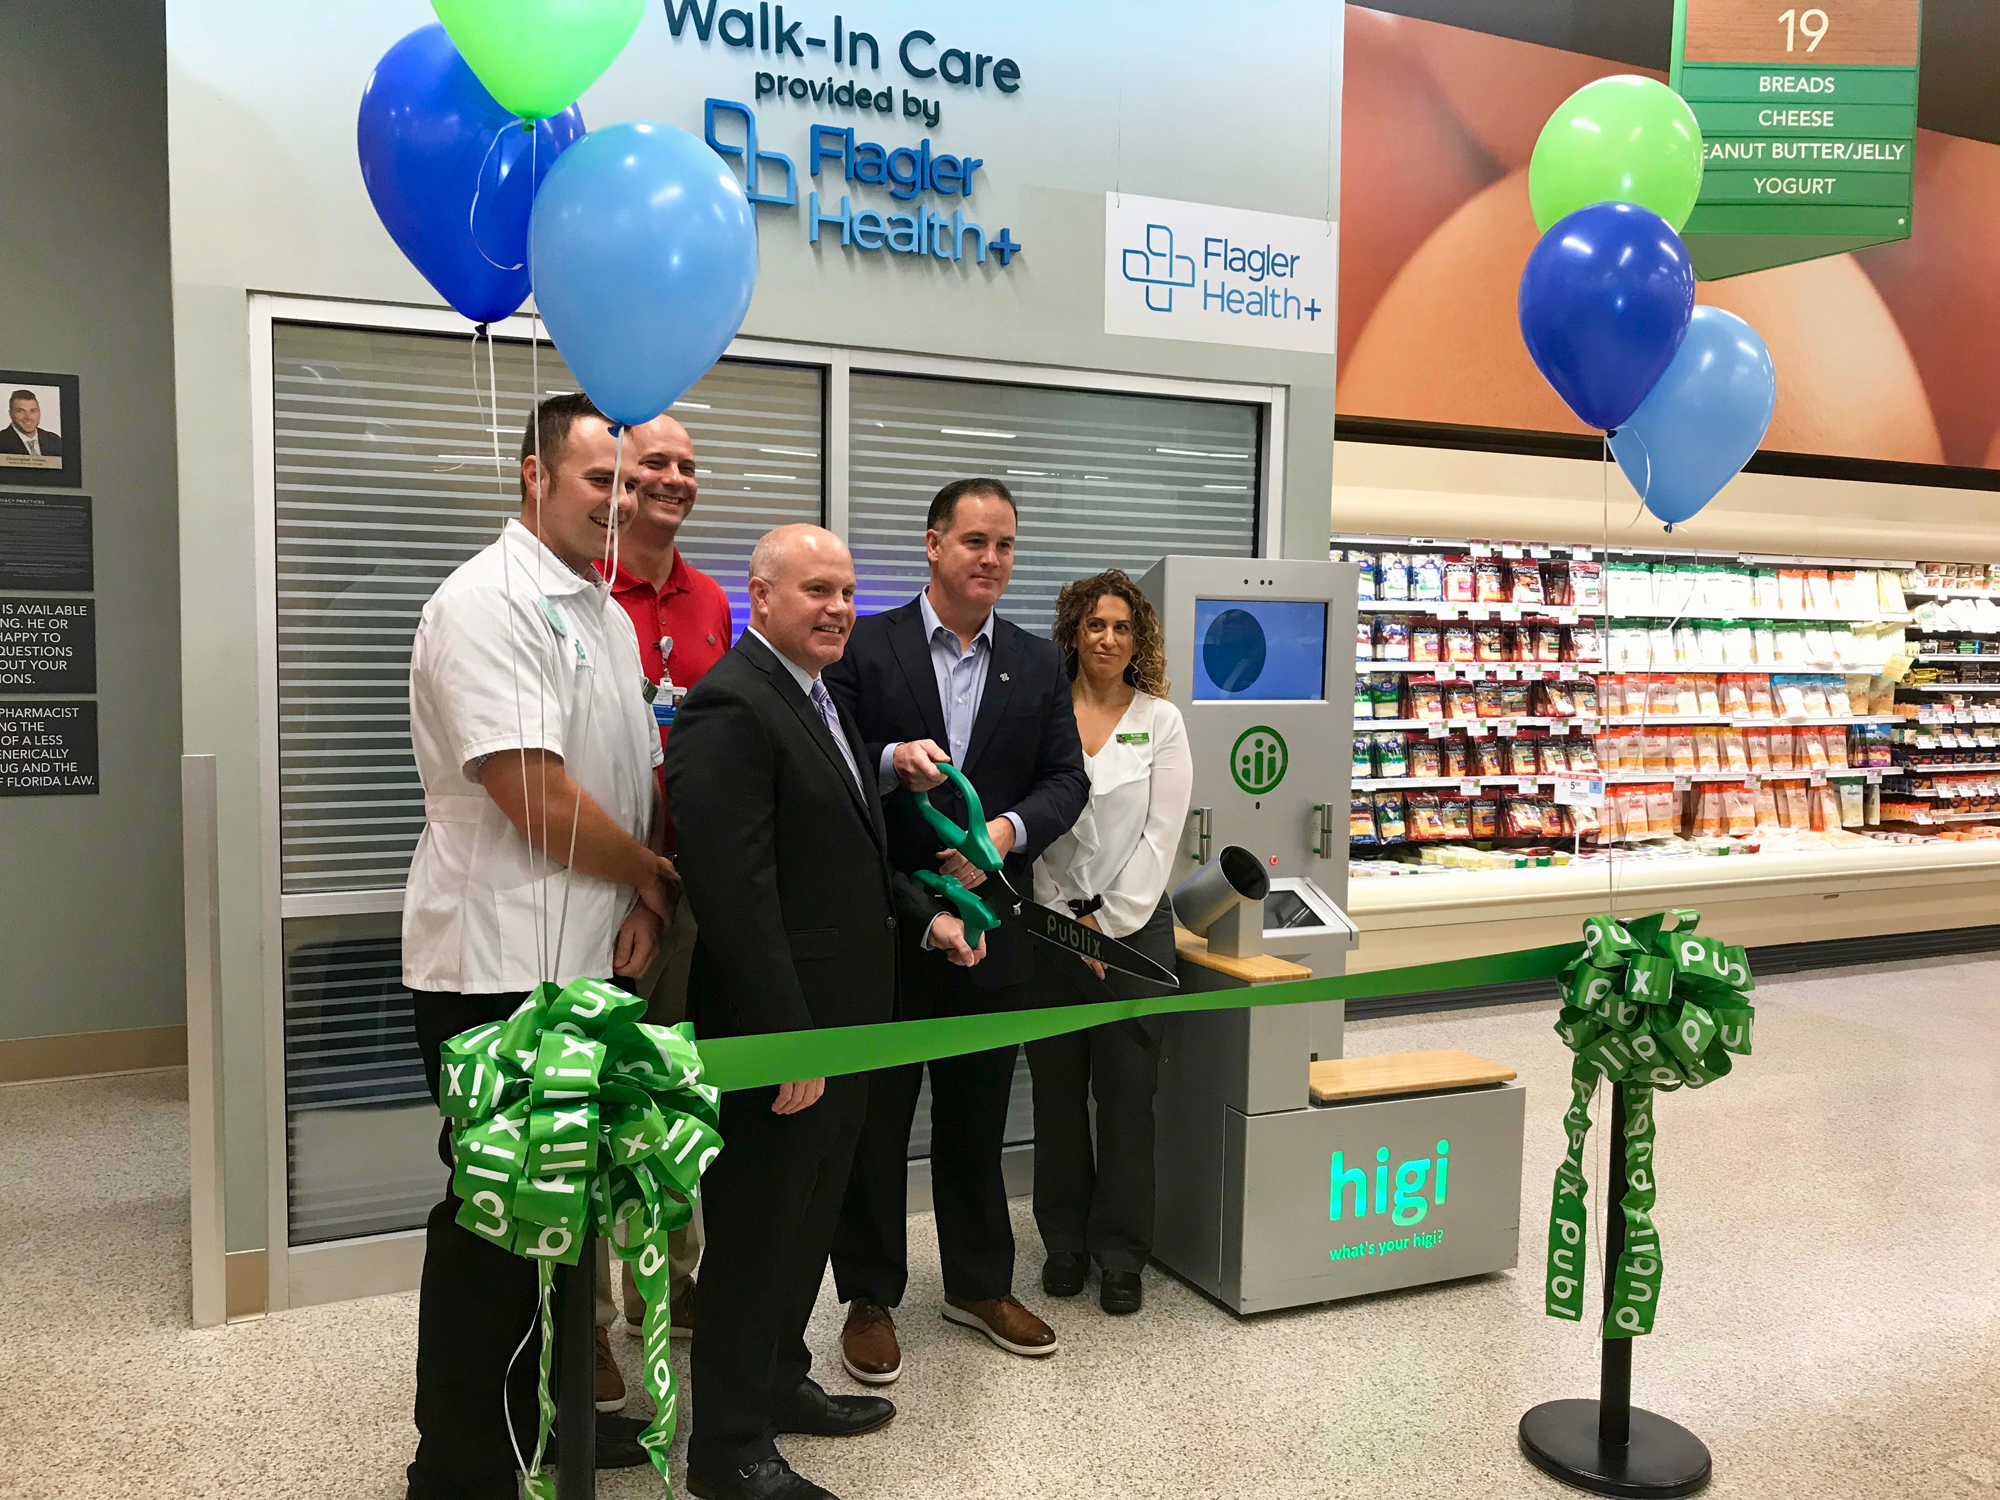 Officials prepare to cut the ribbon at the grand opening of the telehealth kiosk at the Publix supermarket in Nocatee.